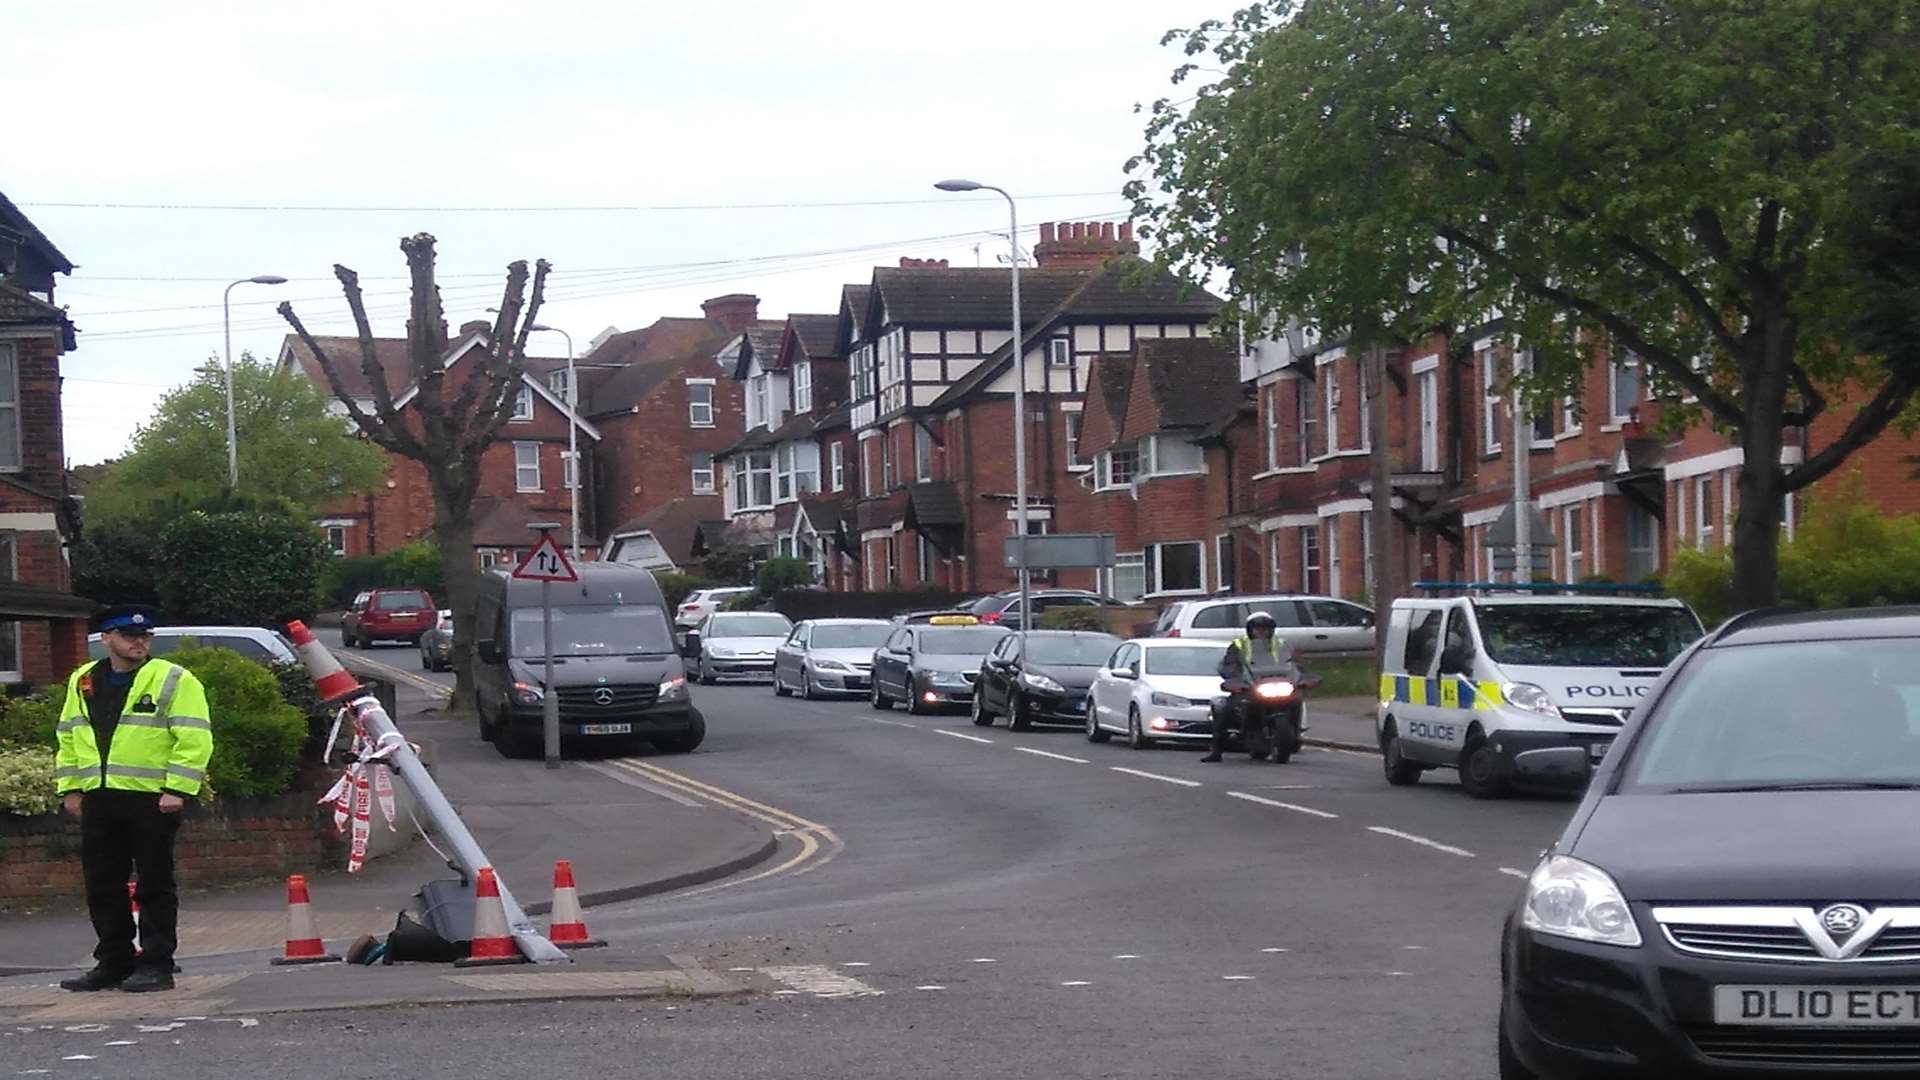 The lamppost was shunted in the crash. Picture: Cllr Mary Lawes